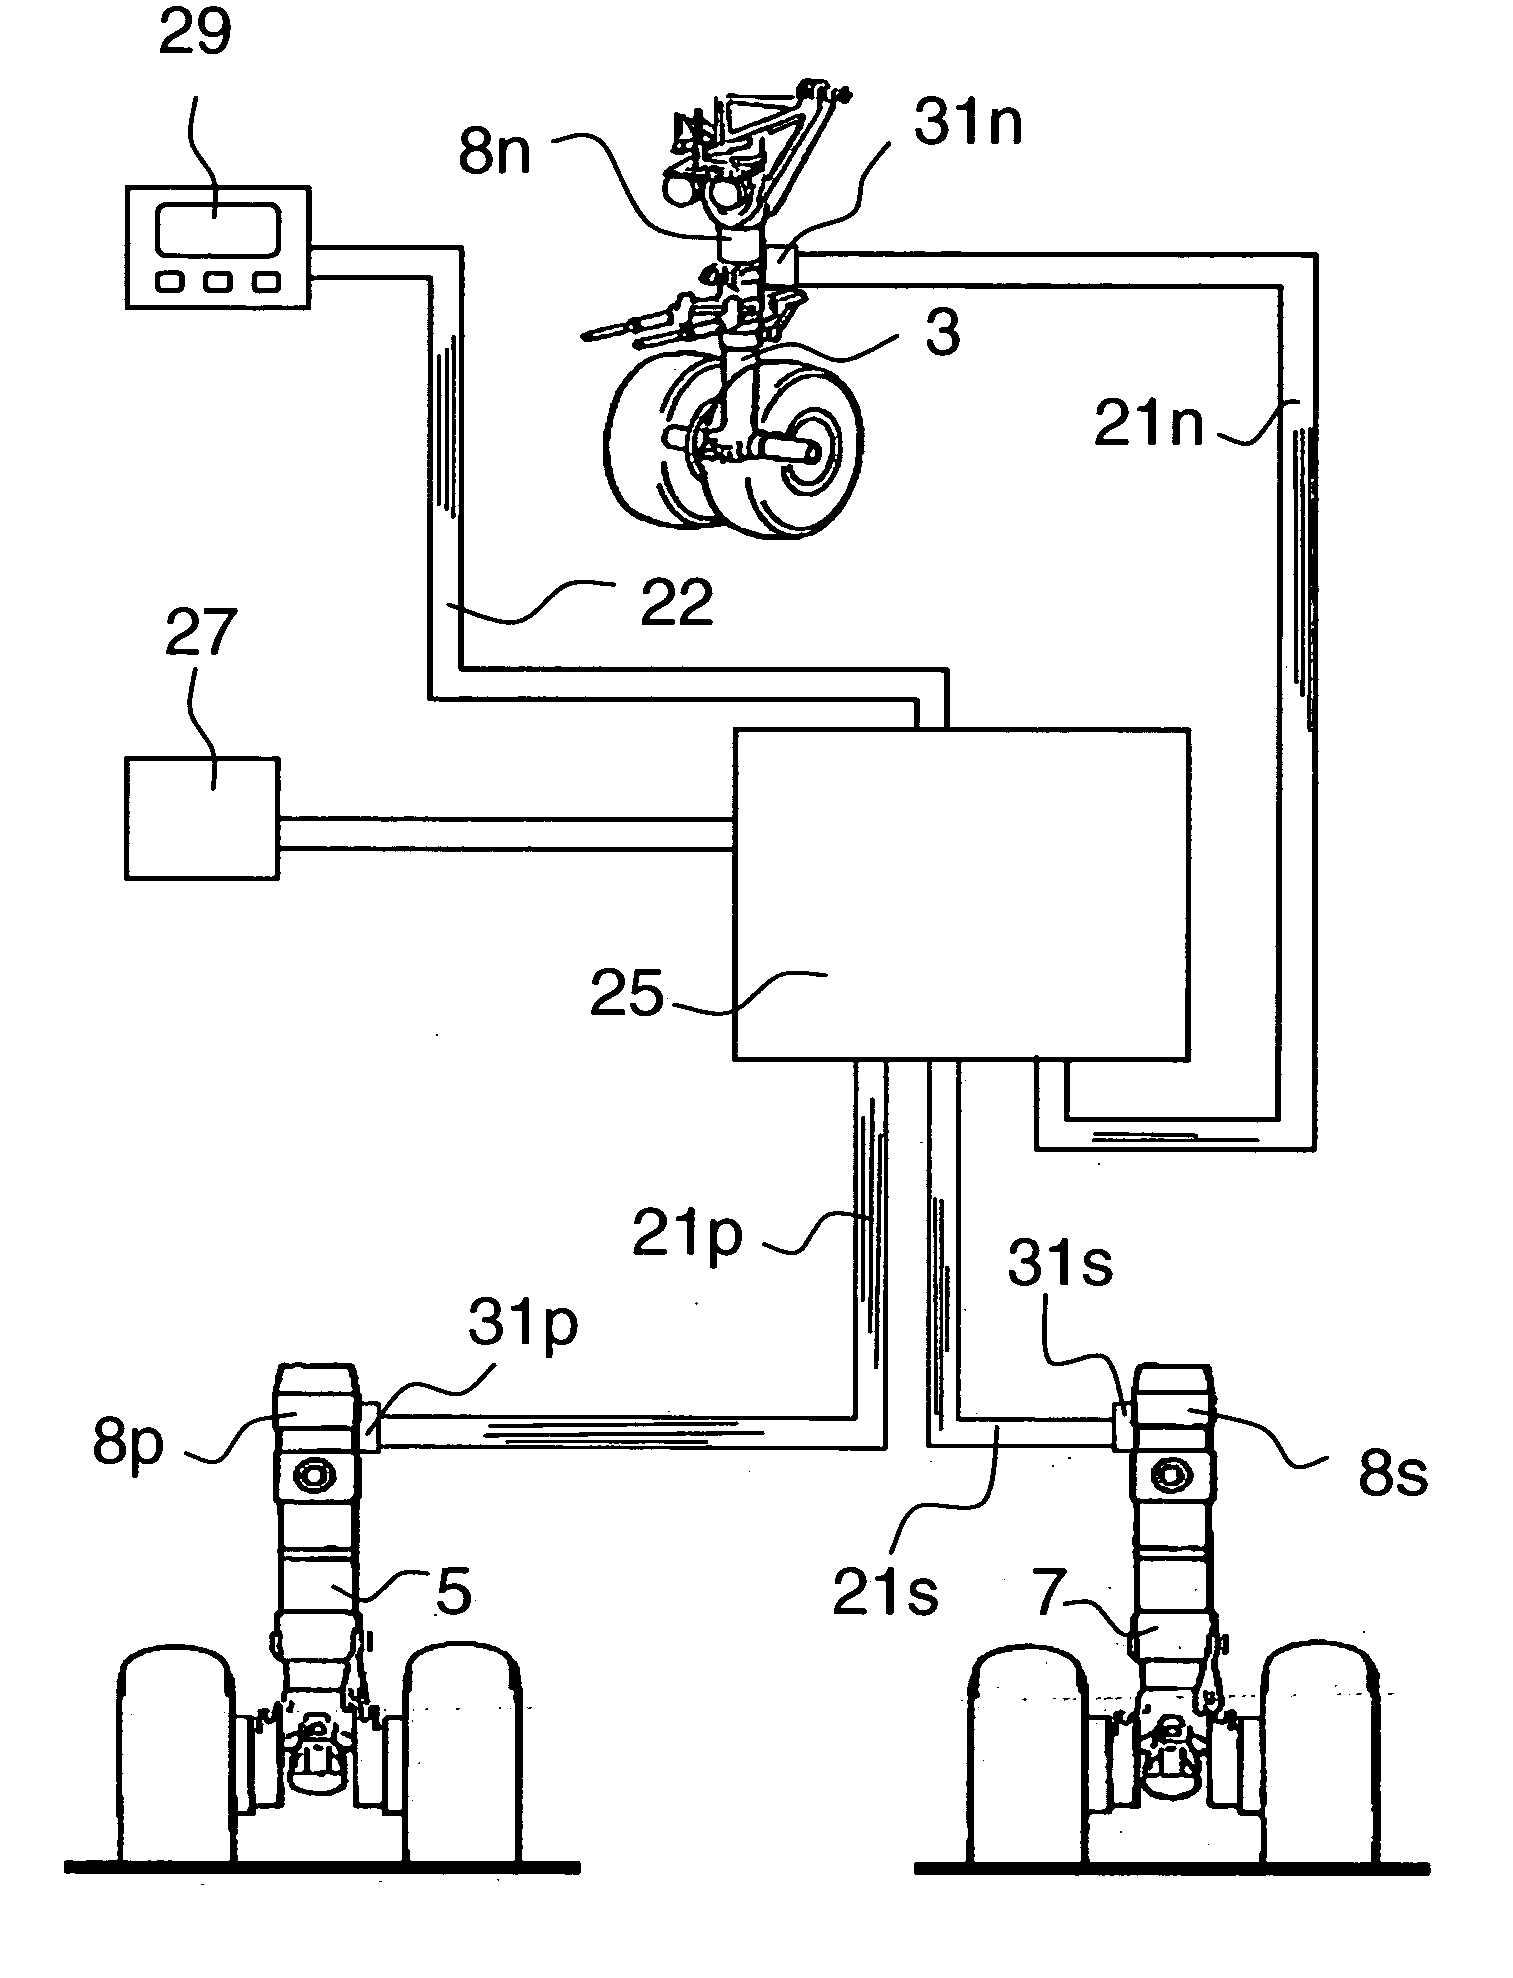 Aircraft landing gear automated inspection and life limitation escalation system and method